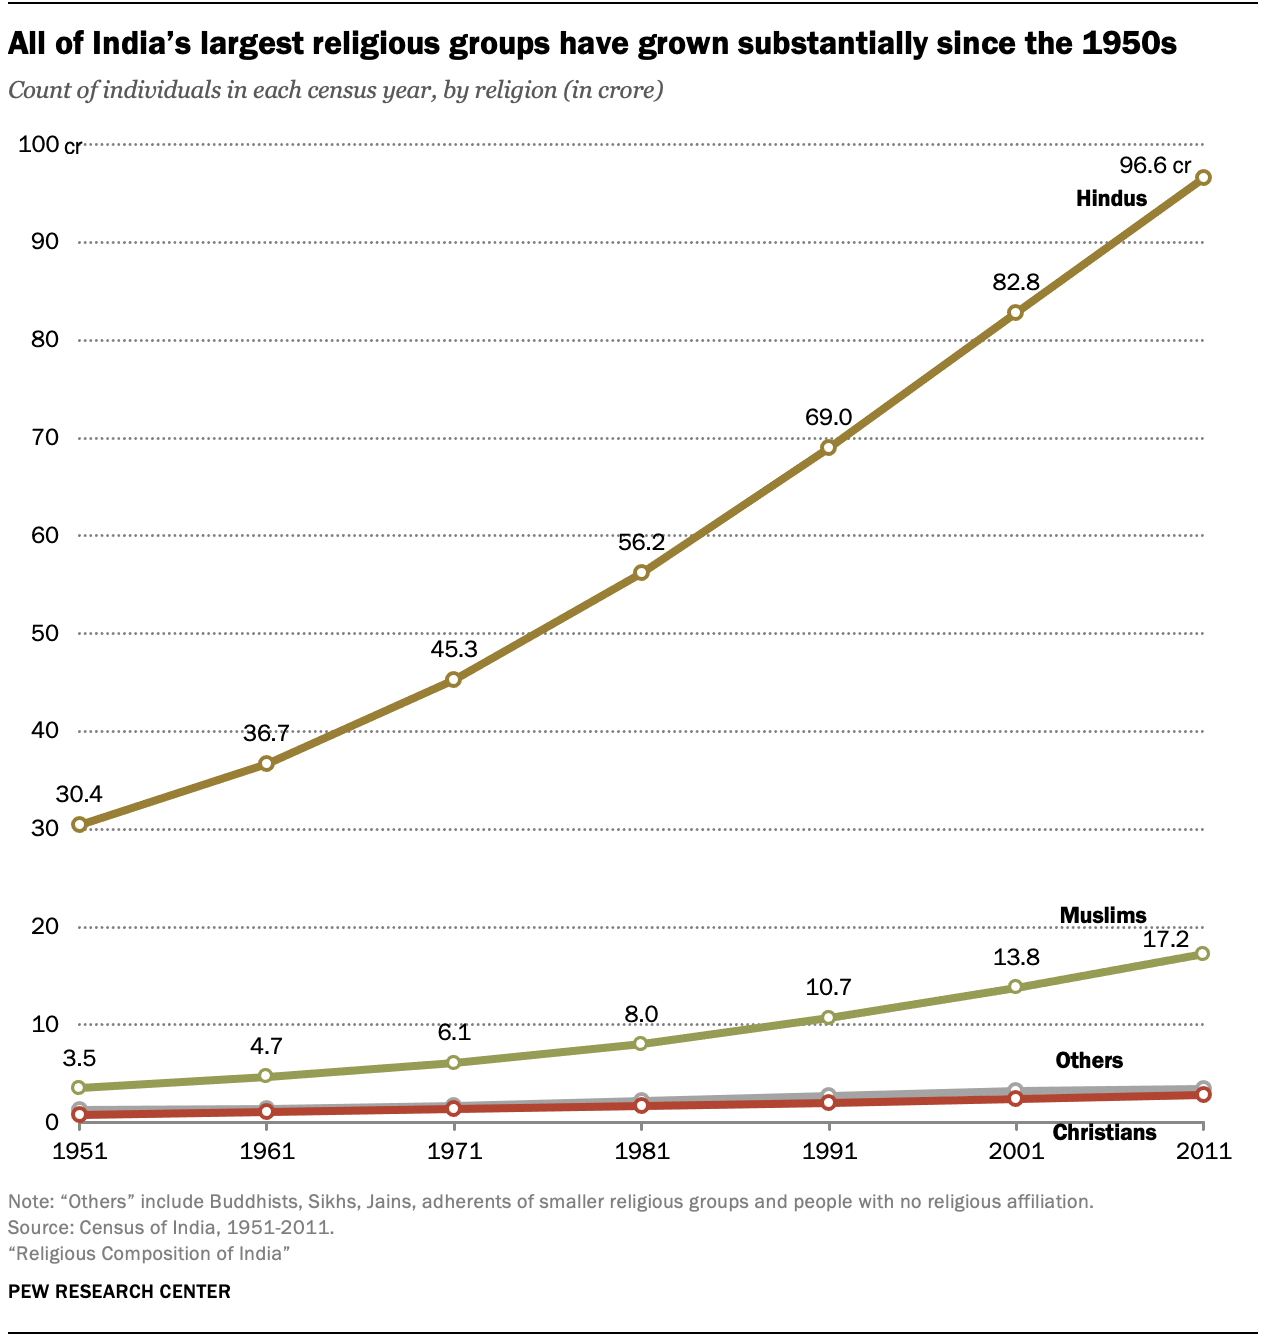 All of India’s largest religious groups have grown substantially since the 1950s